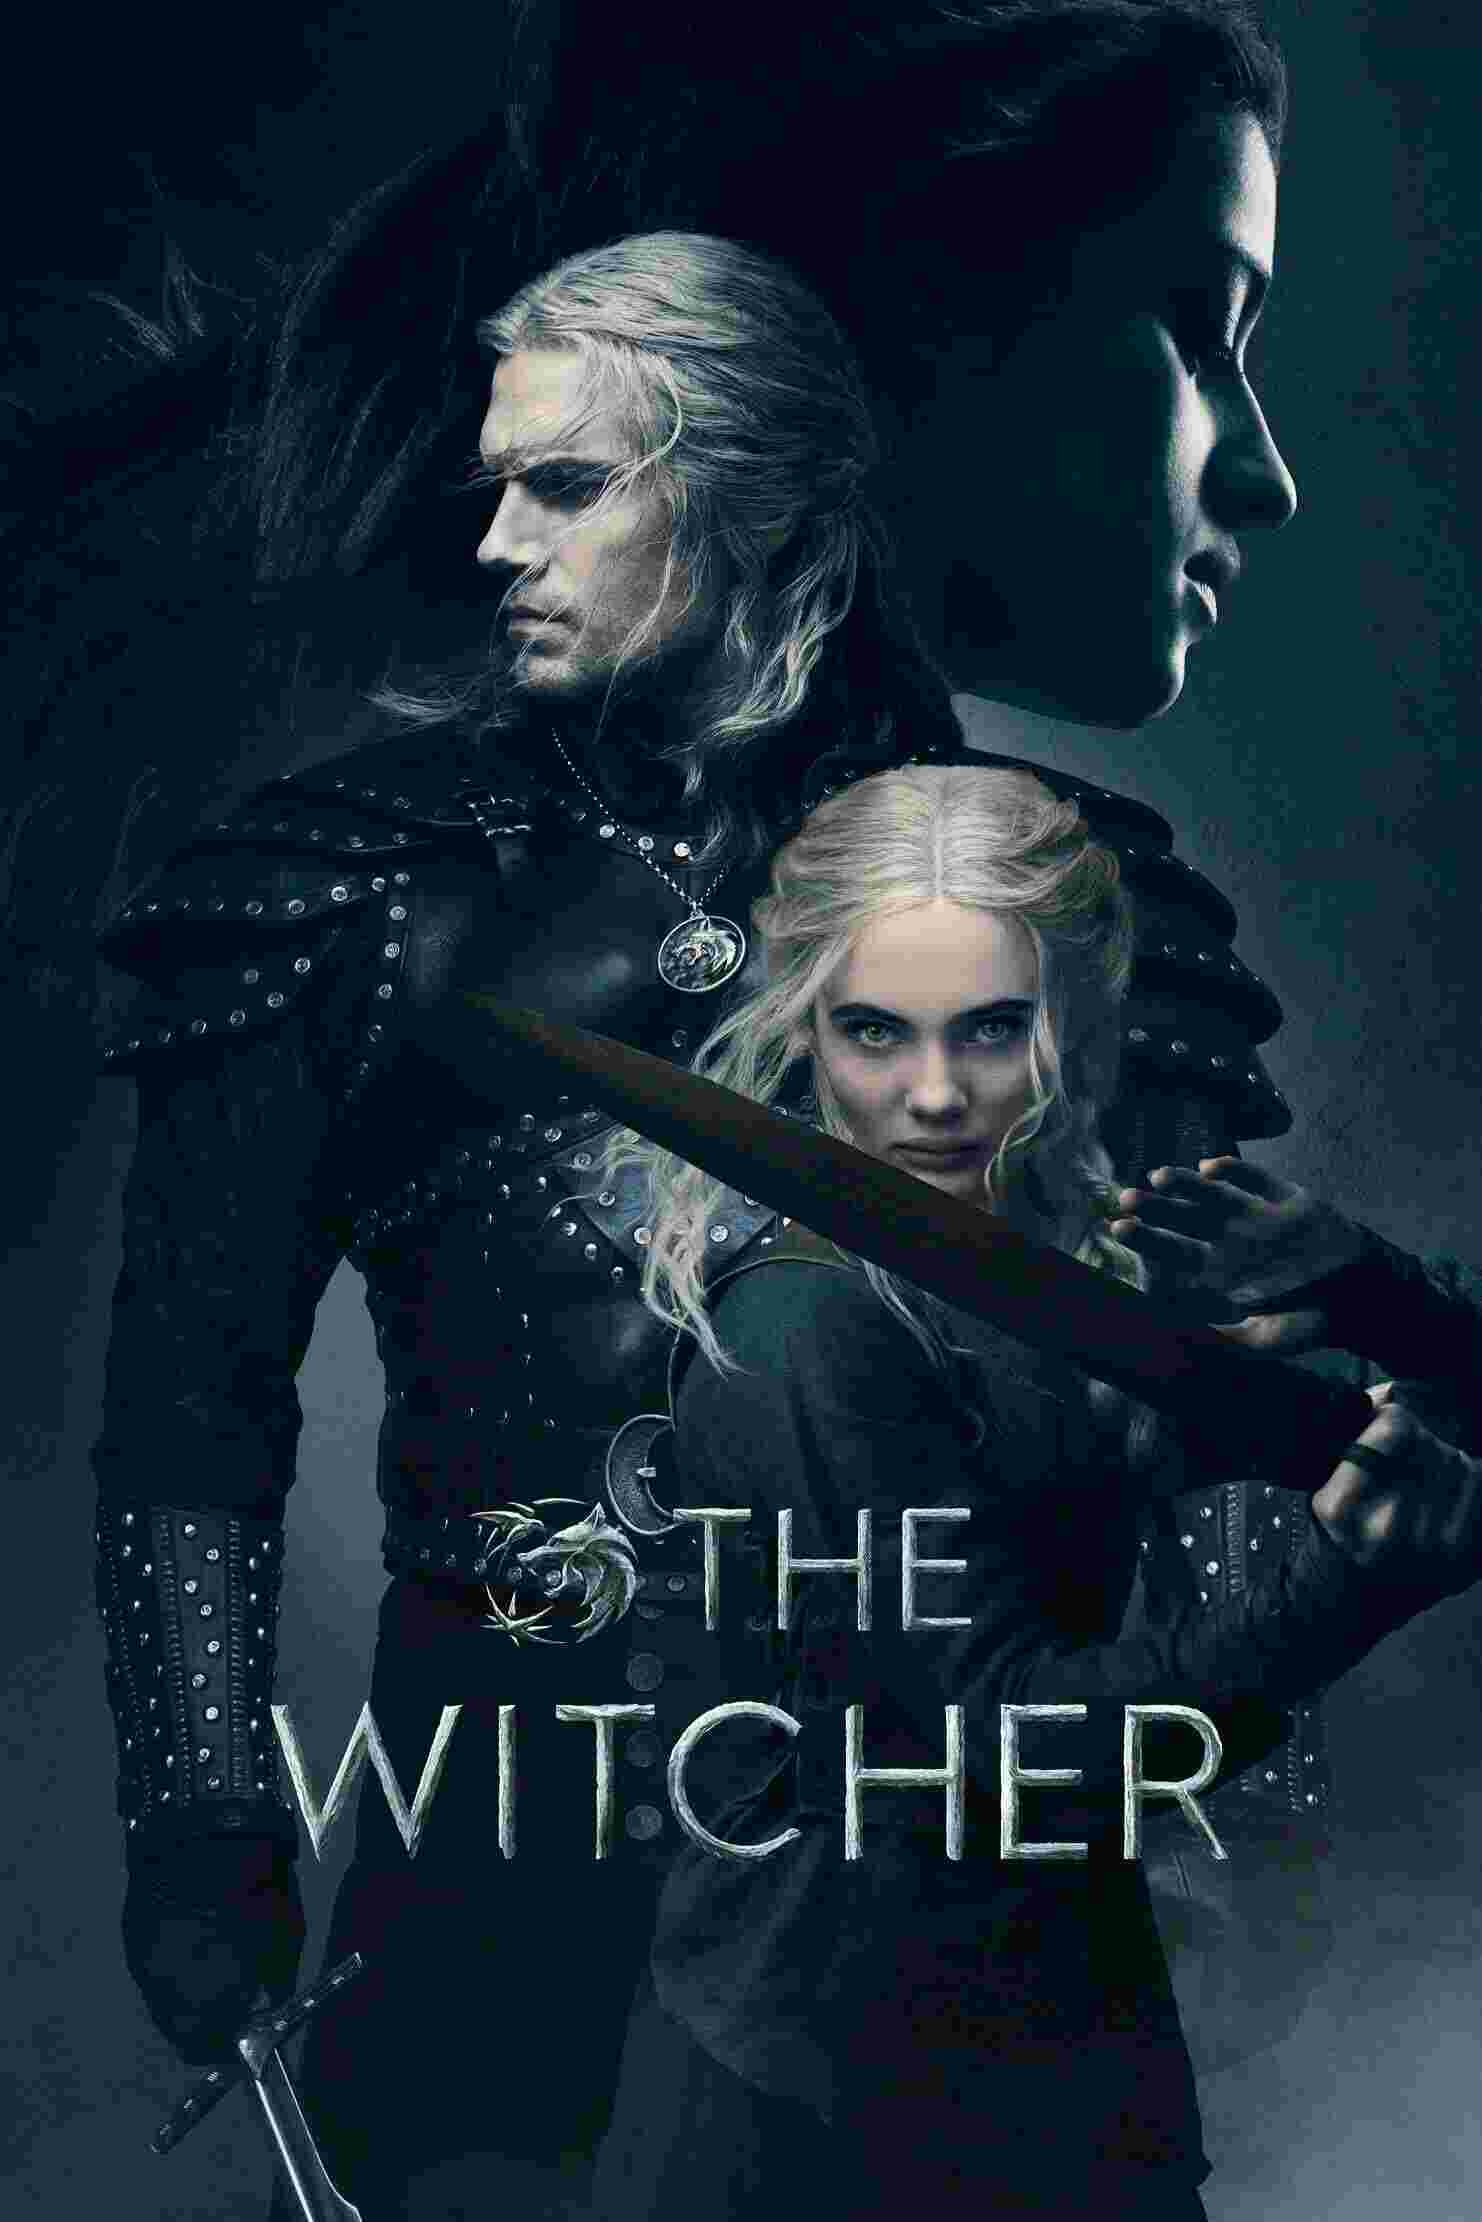 The Witcher (TV Series 2019– ) Henry Cavill